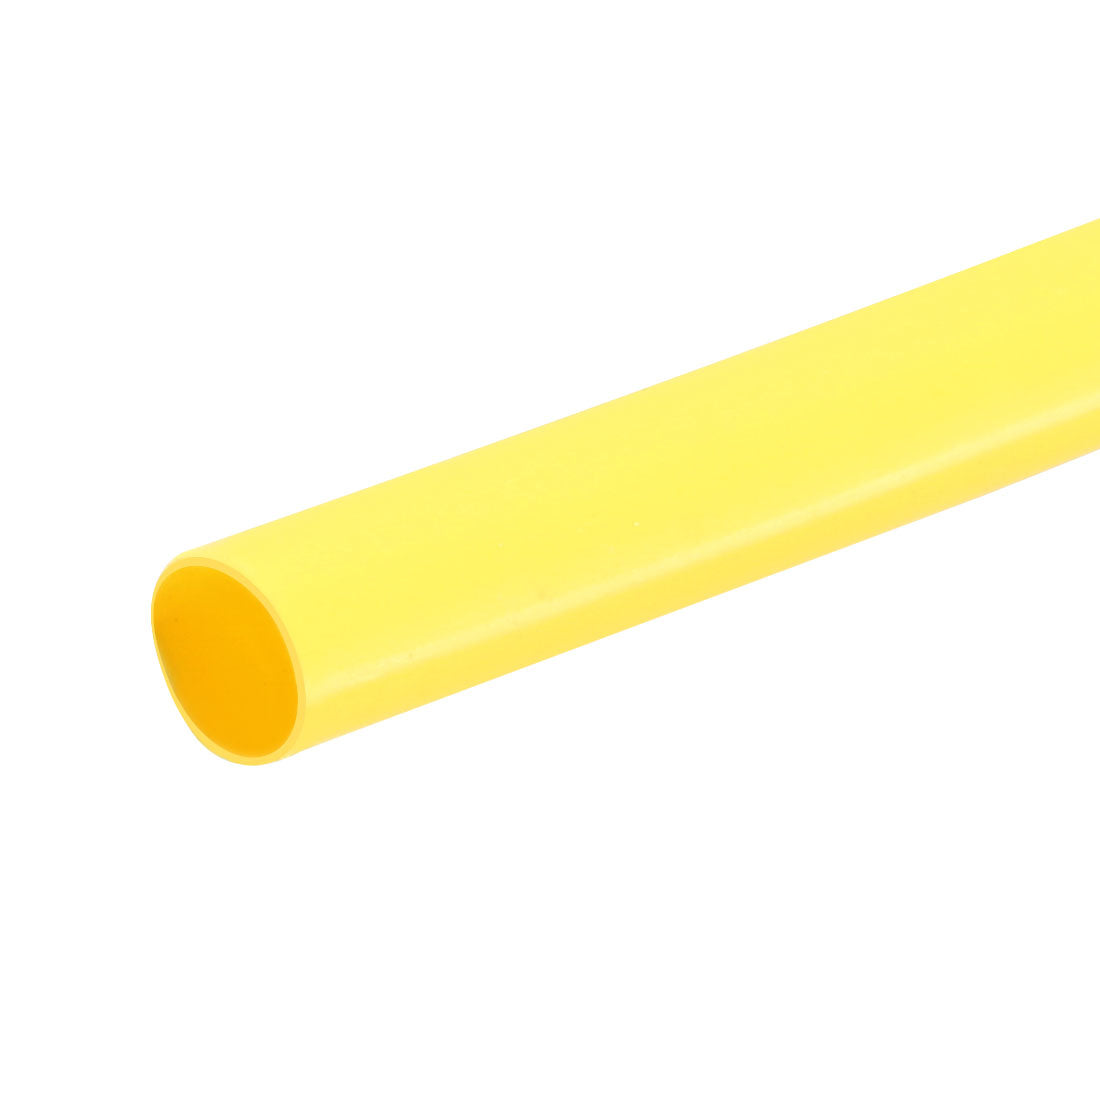 uxcell Uxcell Heat Shrink Tube 2:1 Electrical Insulation Tube Wire Cable Tubing Sleeving Wrap Yellow 2.5mm Diameter 1m Long